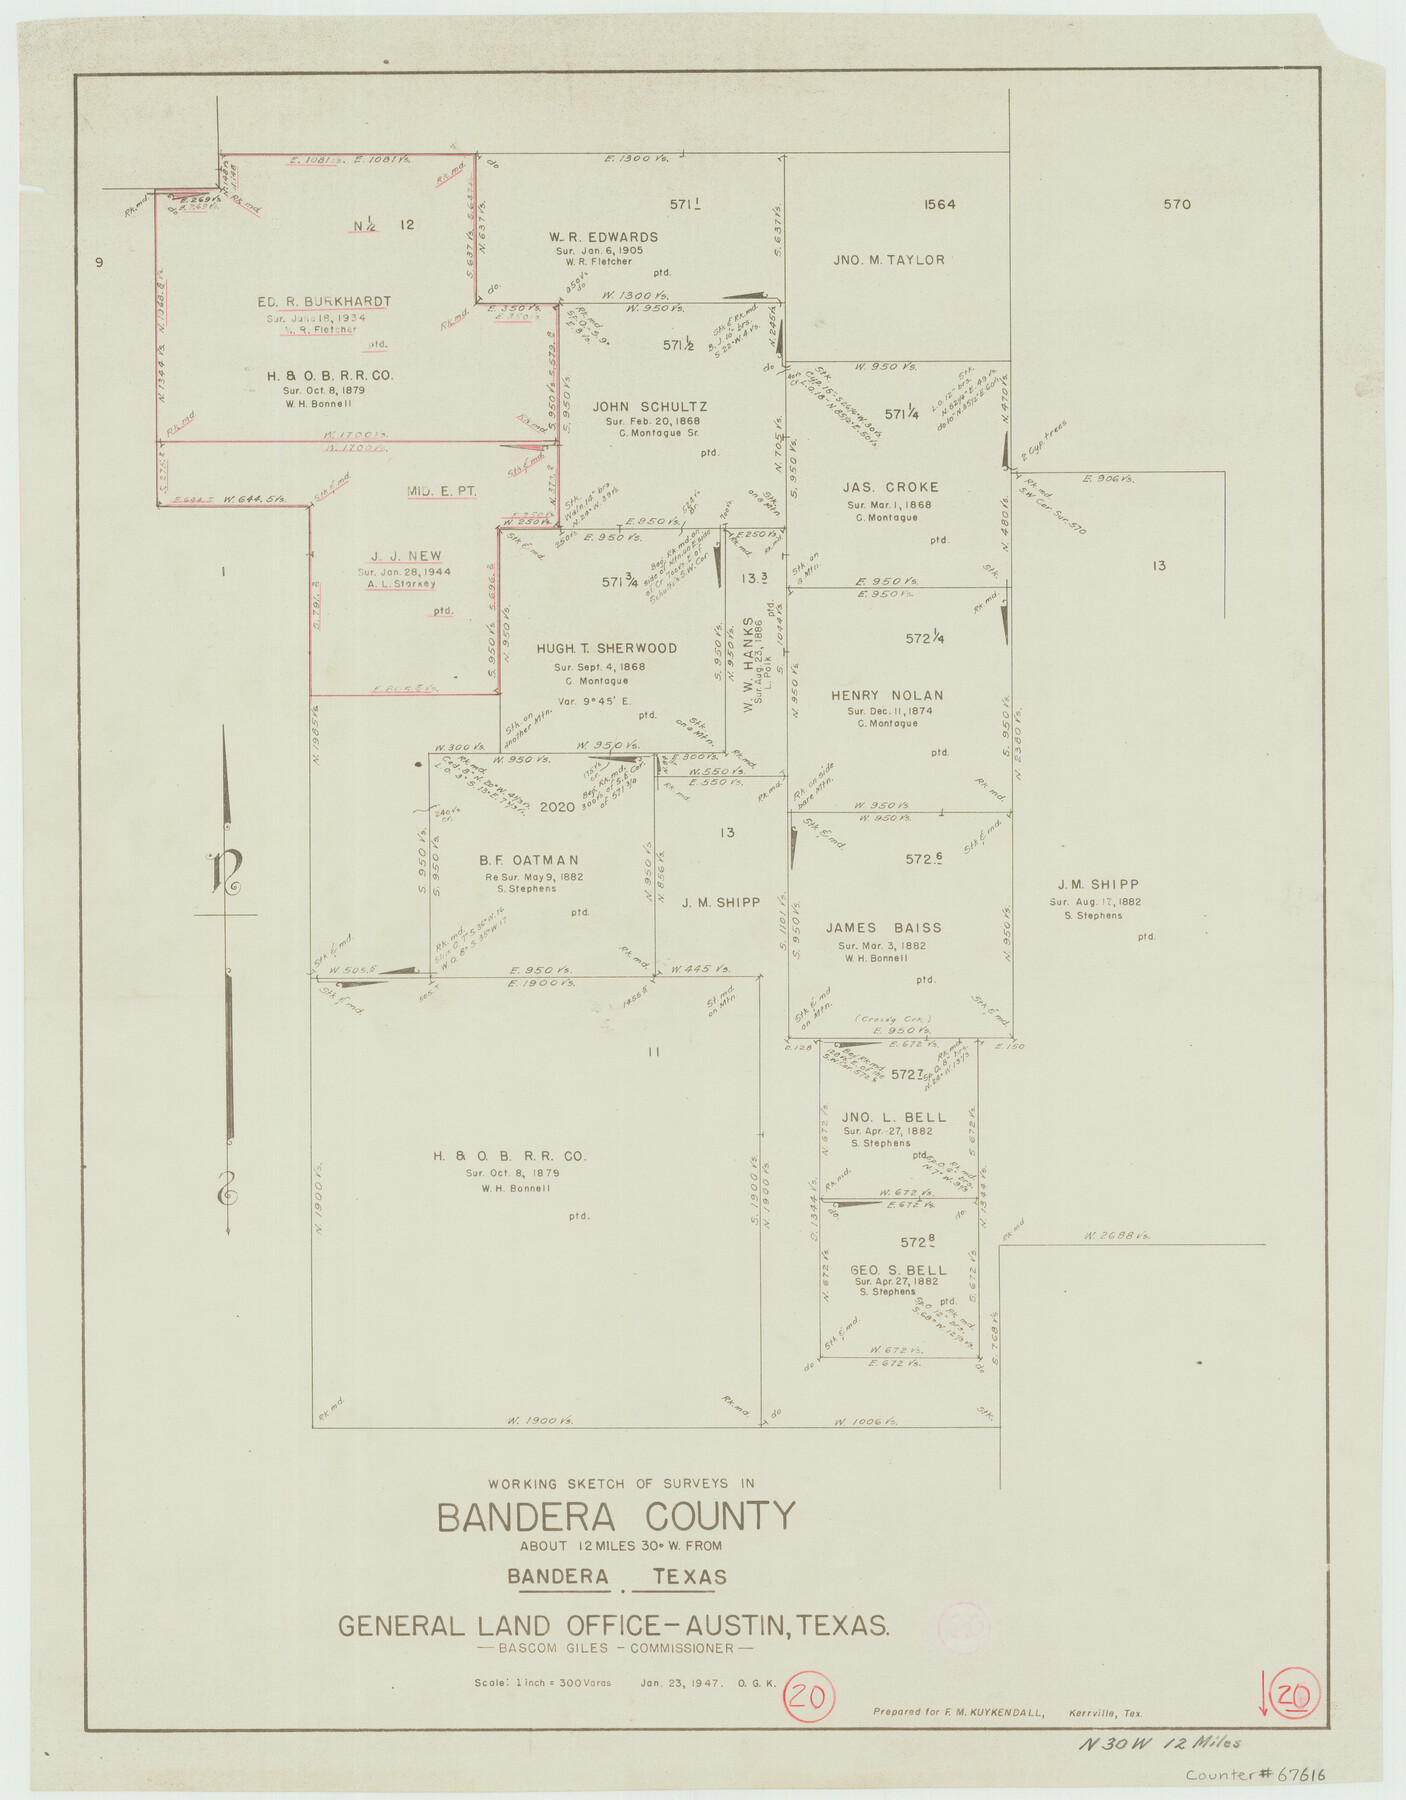 67616, Bandera County Working Sketch 20, General Map Collection